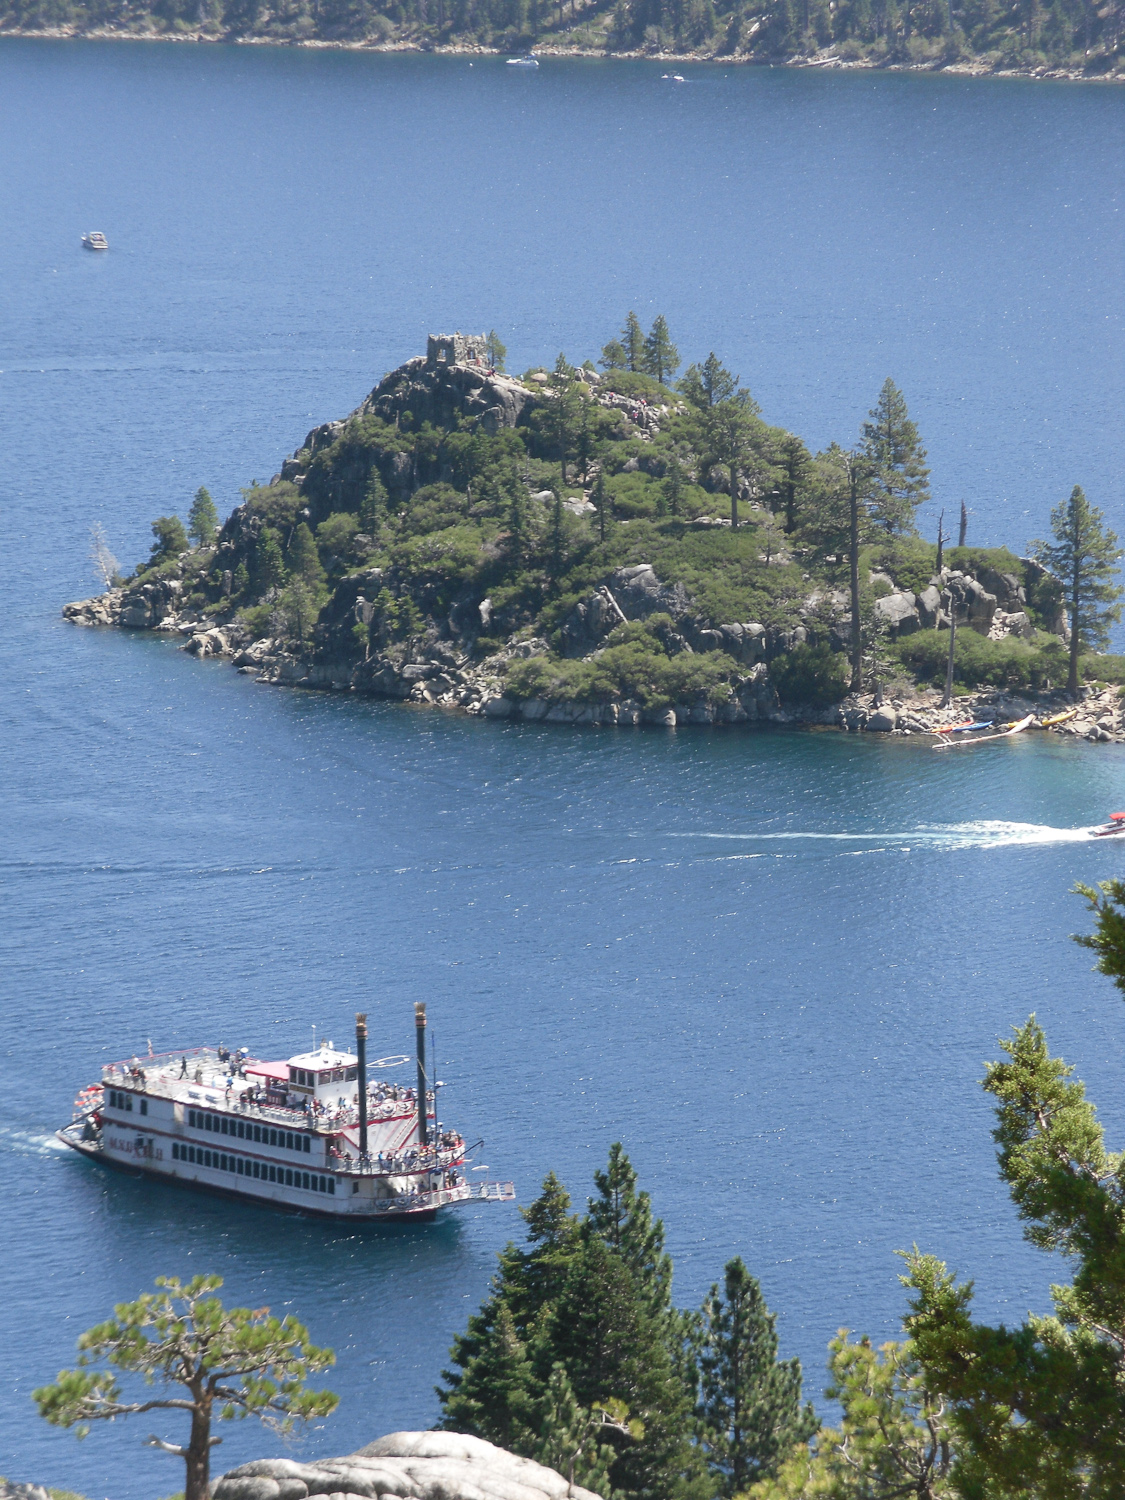 Views of Fannette Island in Emerald Bay from trail to Vikingsholm- Tahoe Queen in foreground